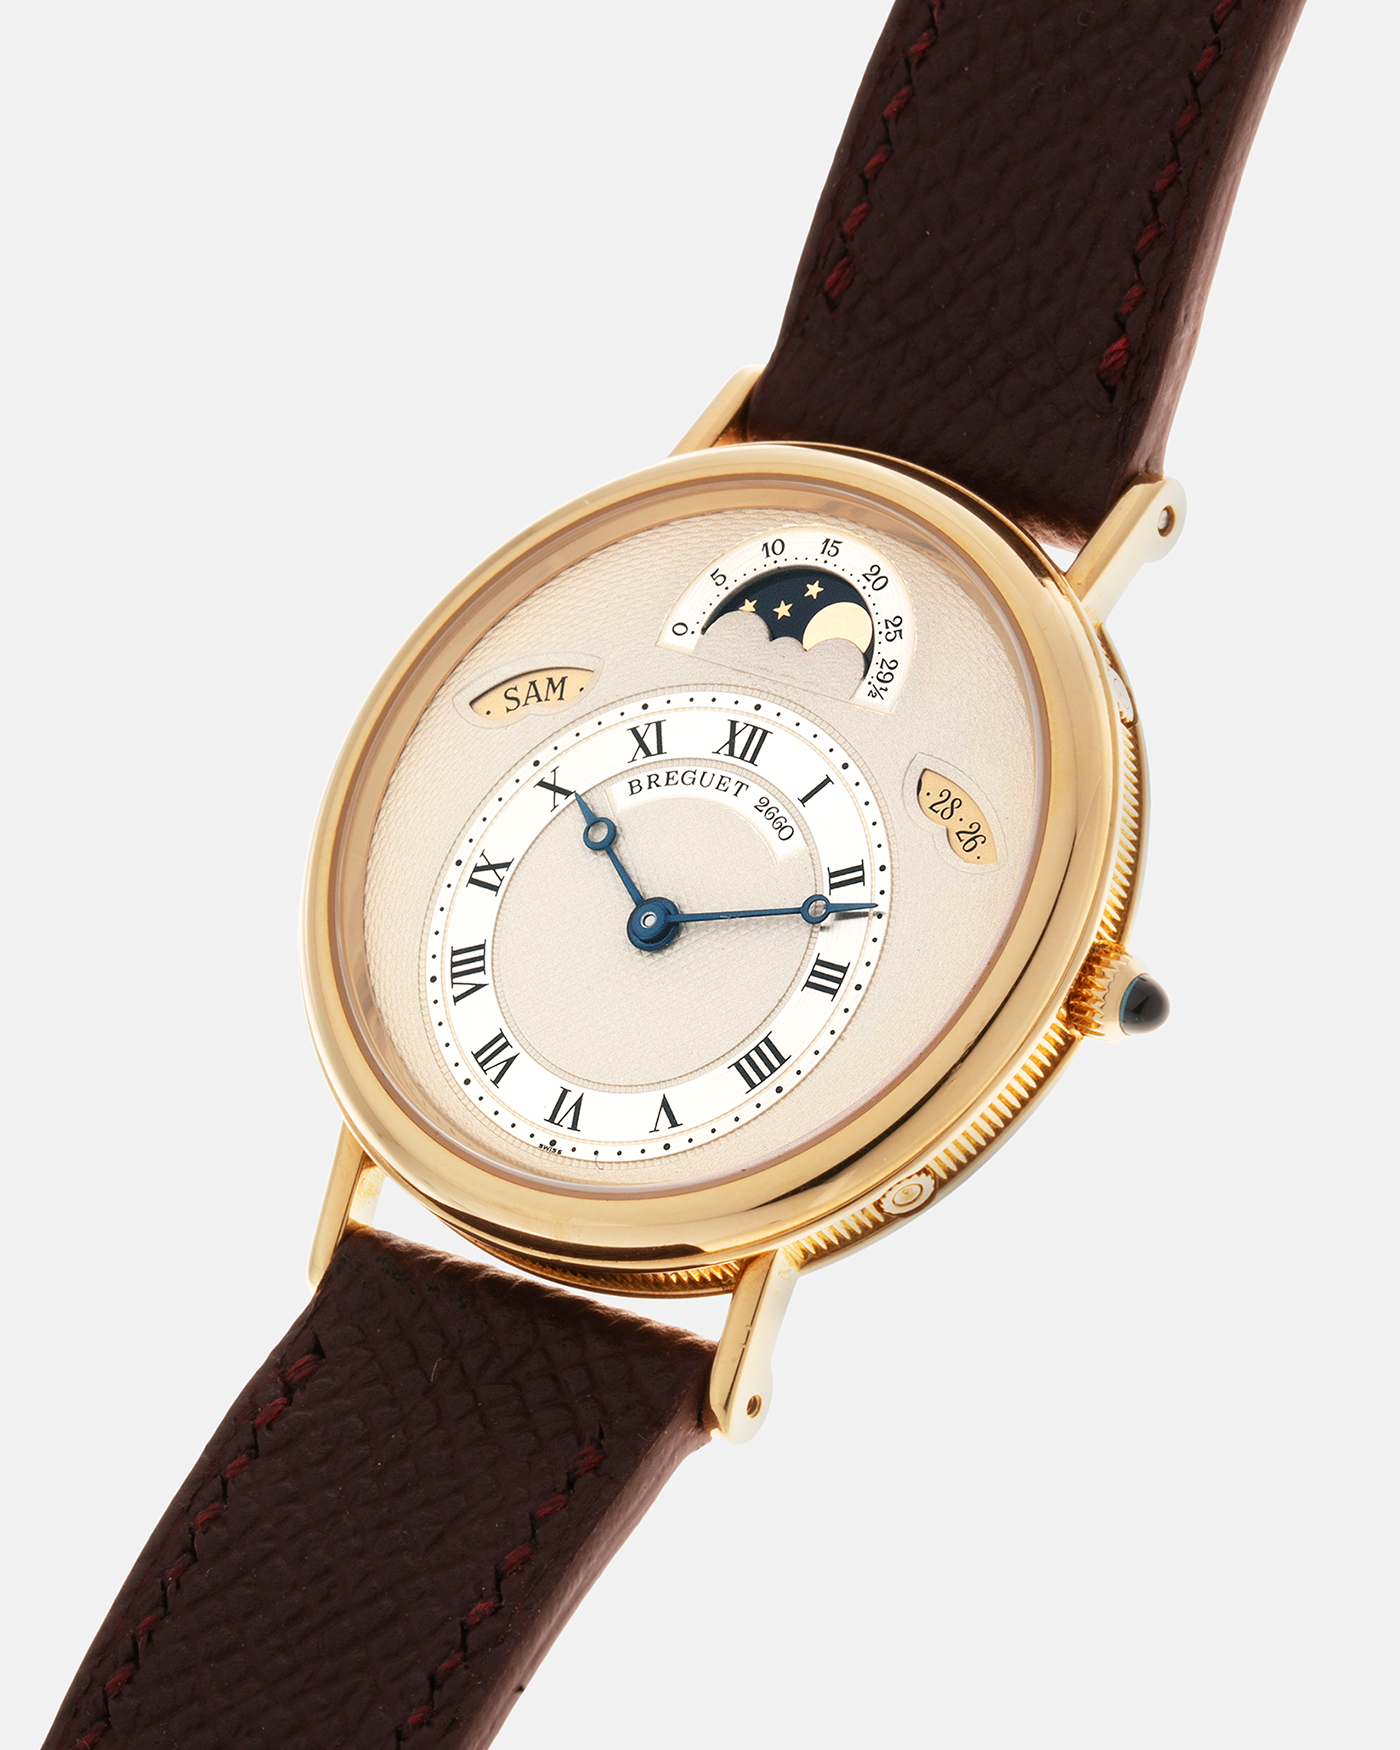 Brand: Breguet Year: 1990’s Model: Classique Day-Date Moon Phase Reference: 3337 Material: 18-carat Yellow Gold Movement: Breguet Cal. 502, Self-Winding Case Diameter: 36mm Lug Width: 18mm Strap: Generic Mahogany Brown Textured Calf Leather with Signed 18-carat Yellow Gold Tang Buckle